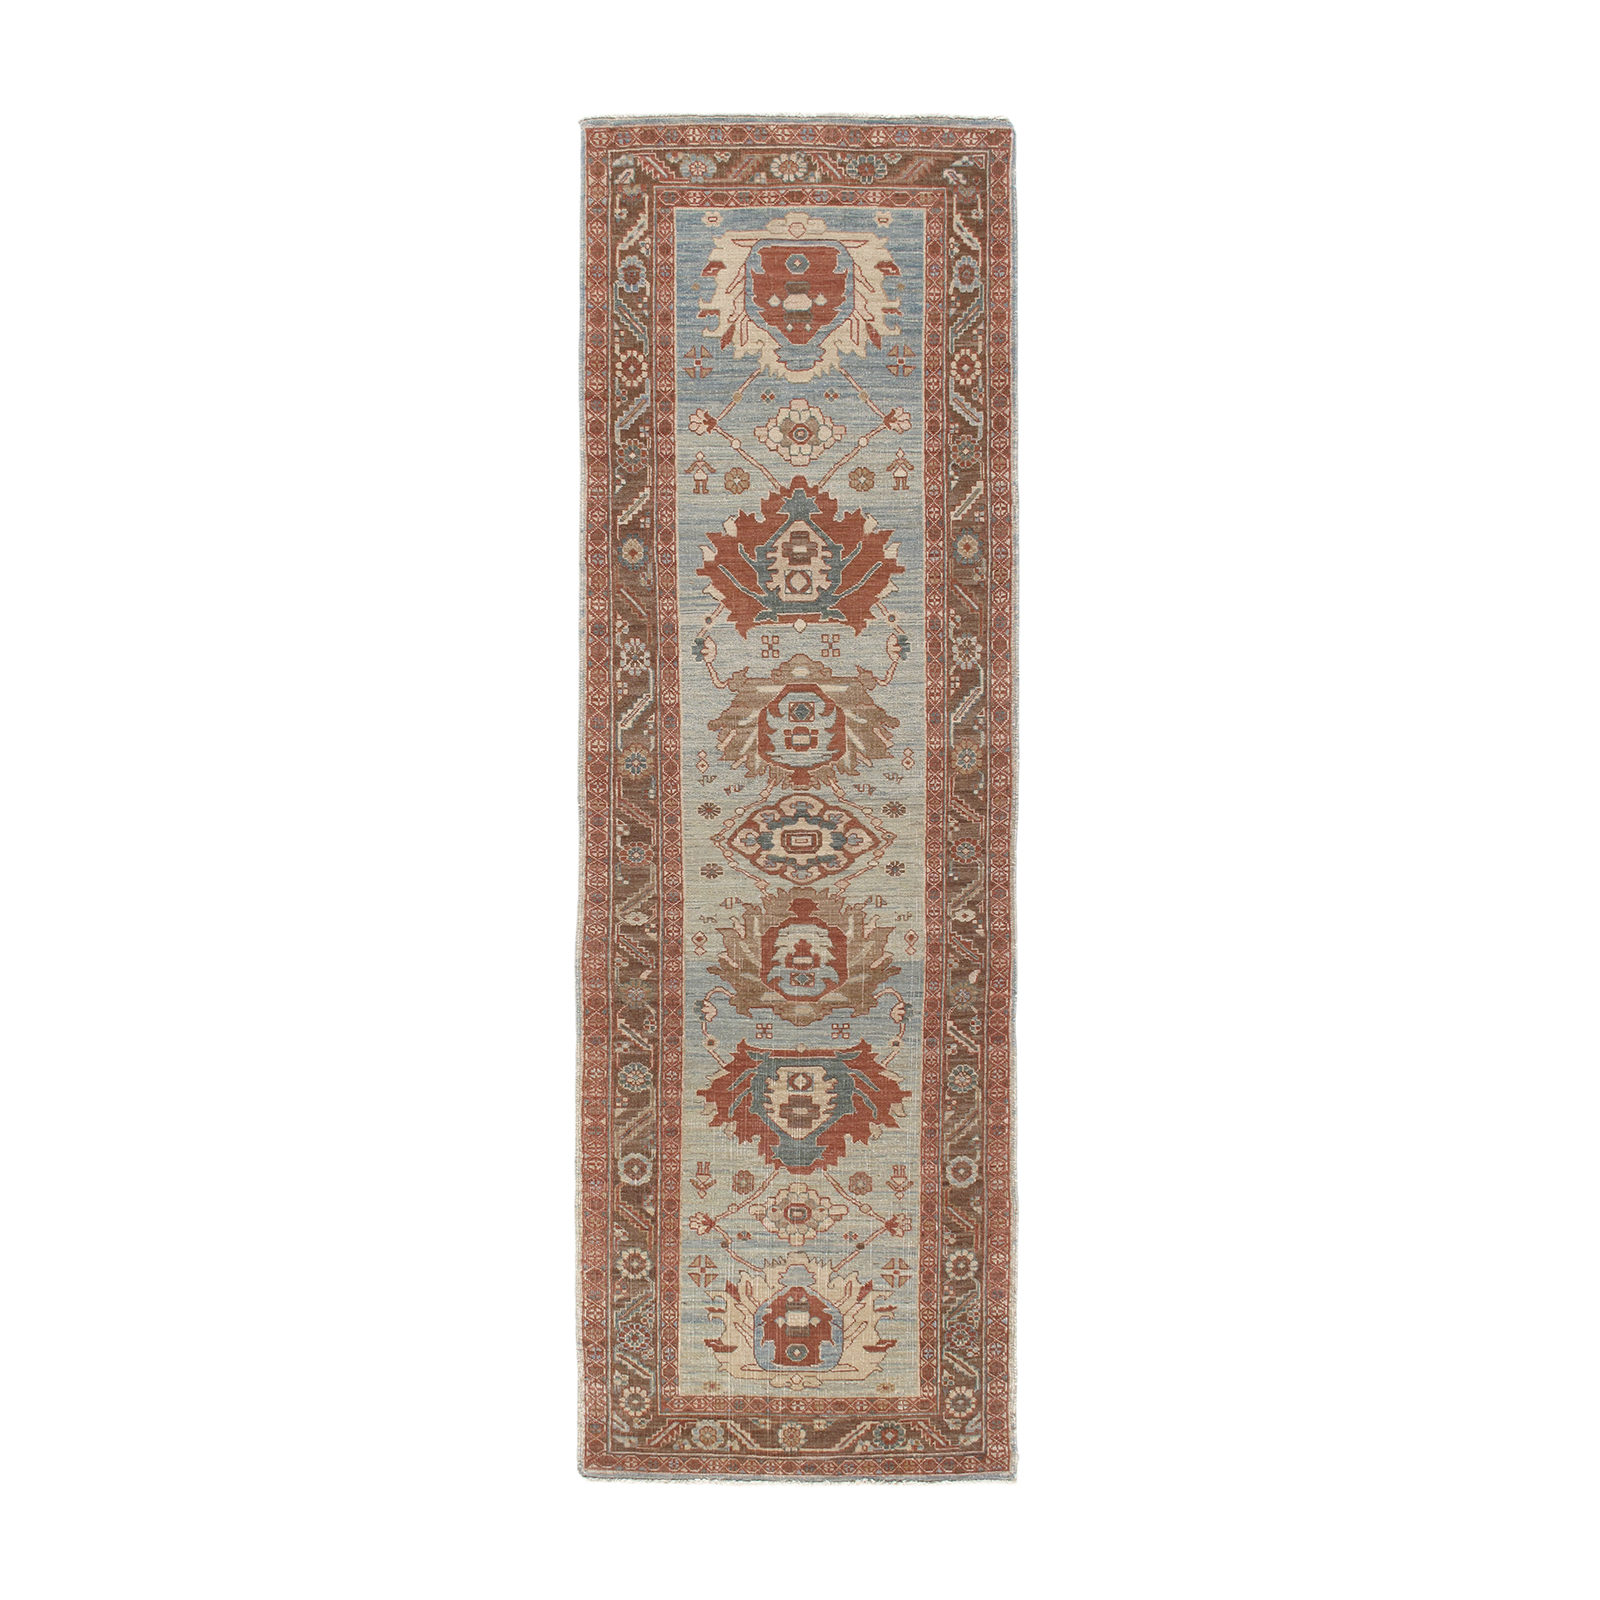 This Bakshaish Runner is hand-knotted and made of 100% wool.